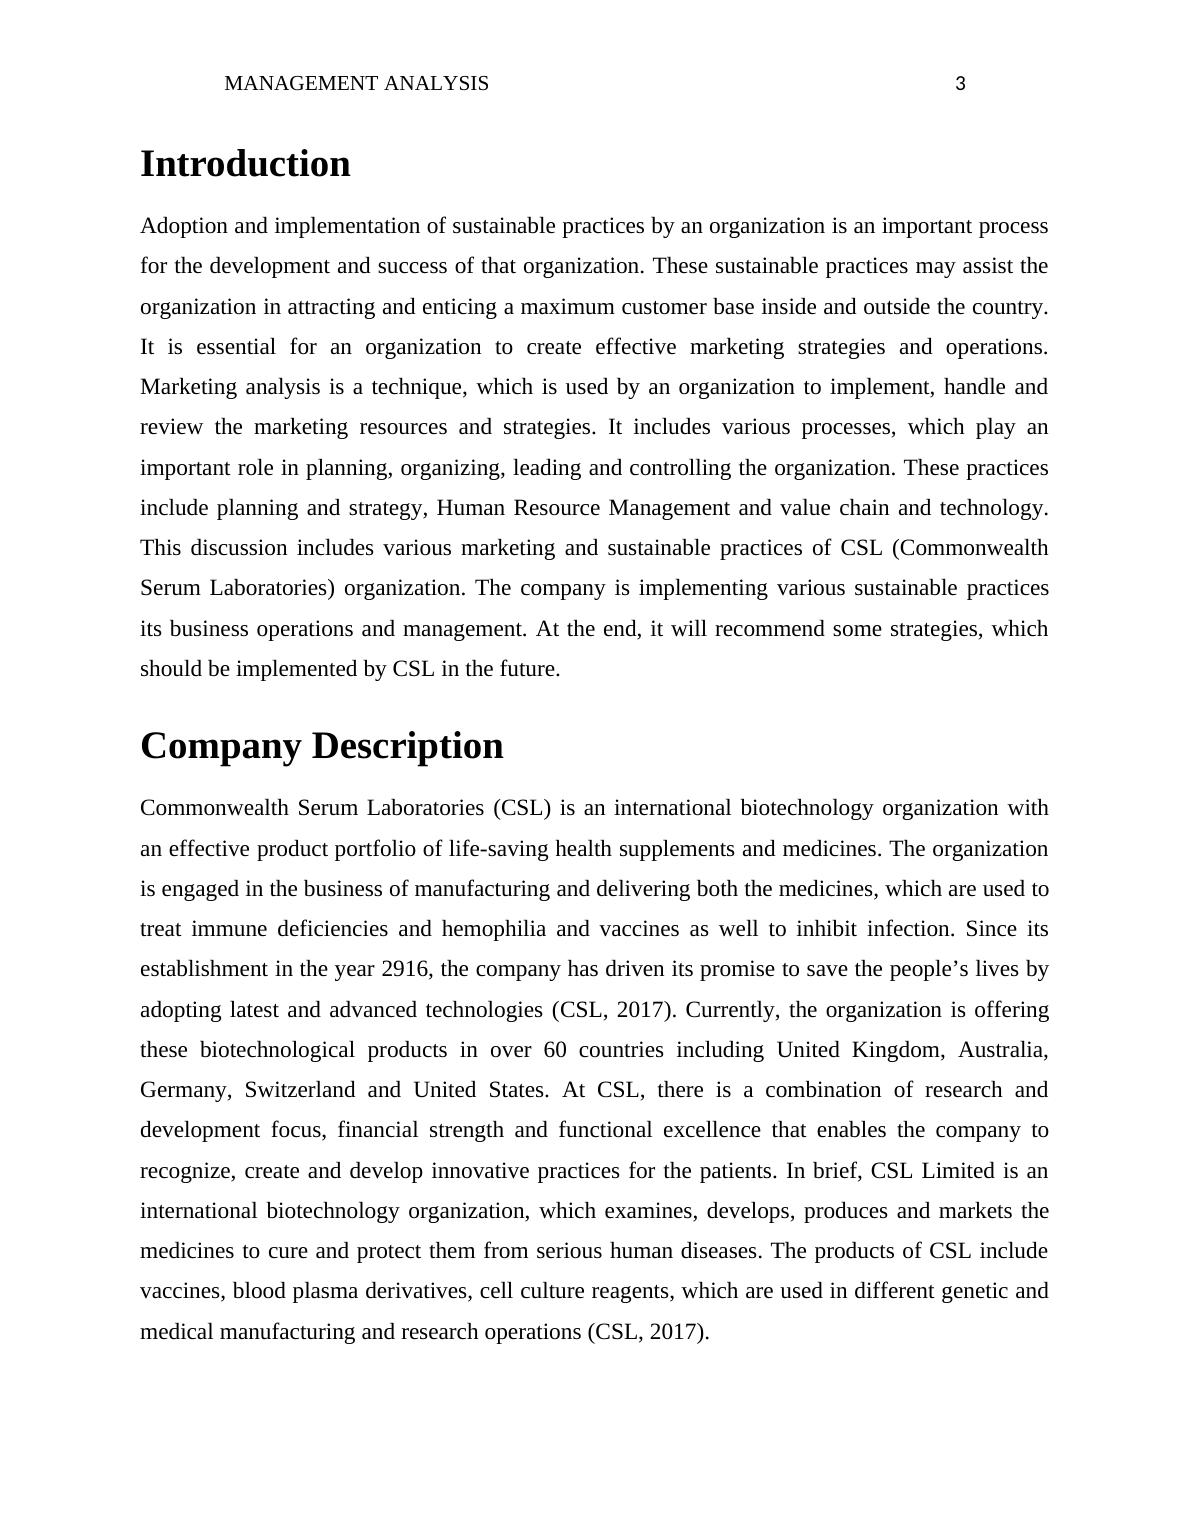 Management Analysis of CSL Limited_3